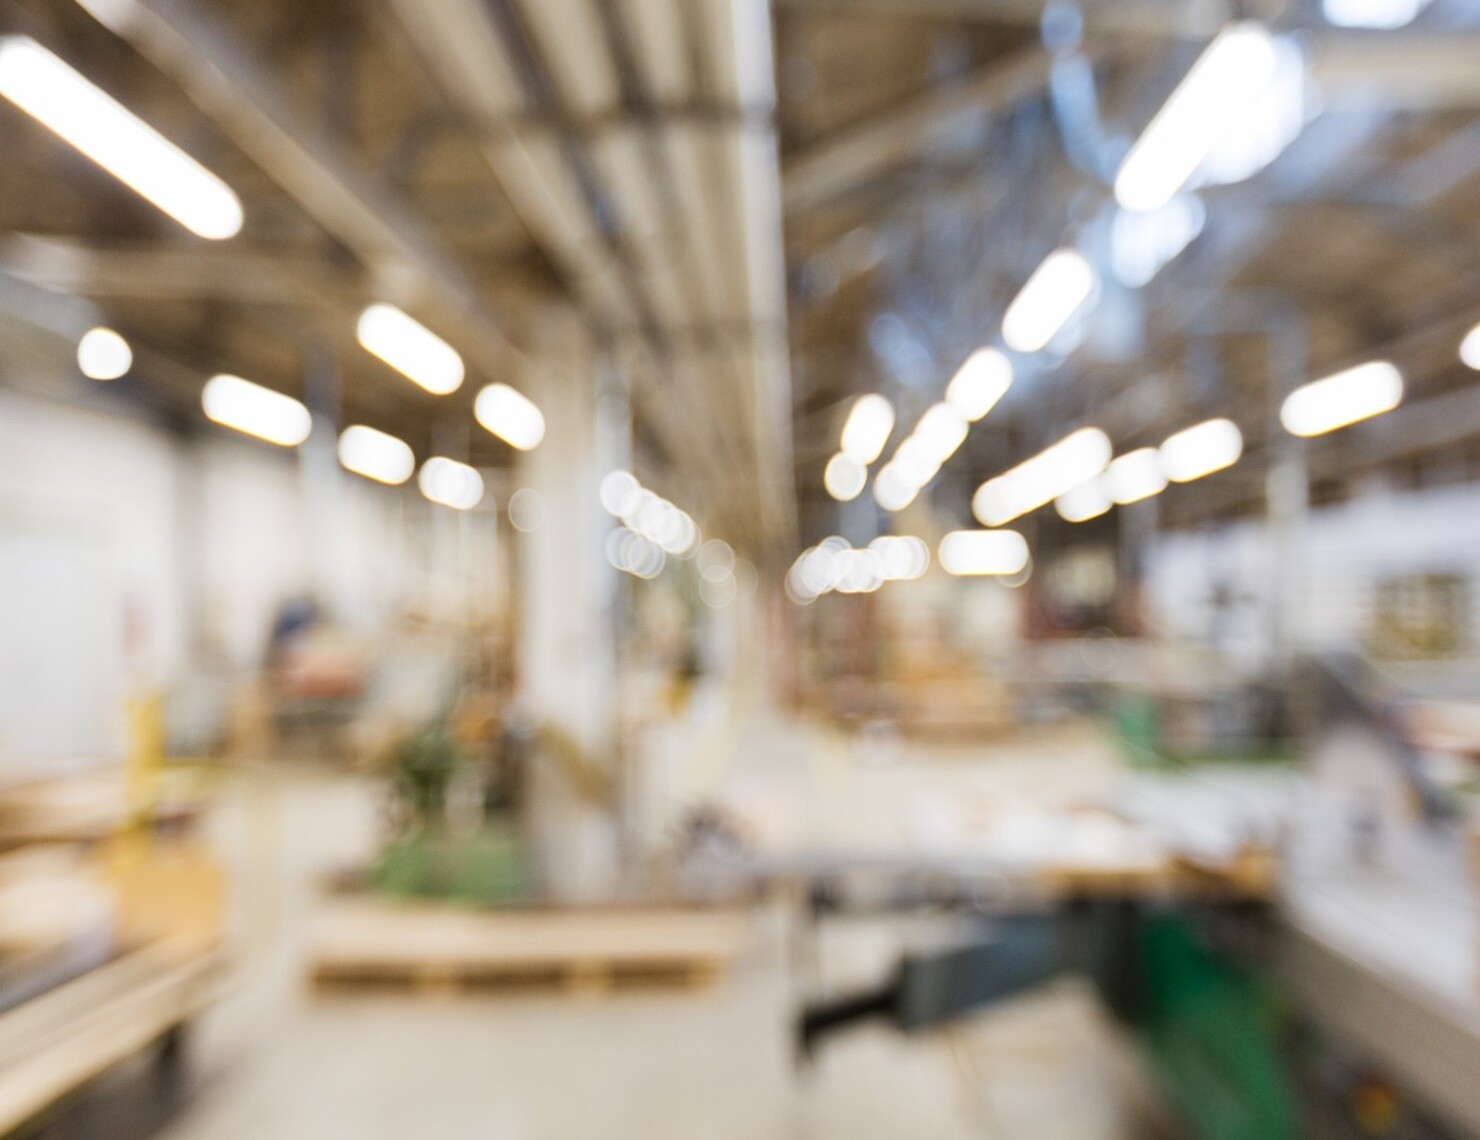 blurred image of a factory floor, representing the fuzzy supply chain